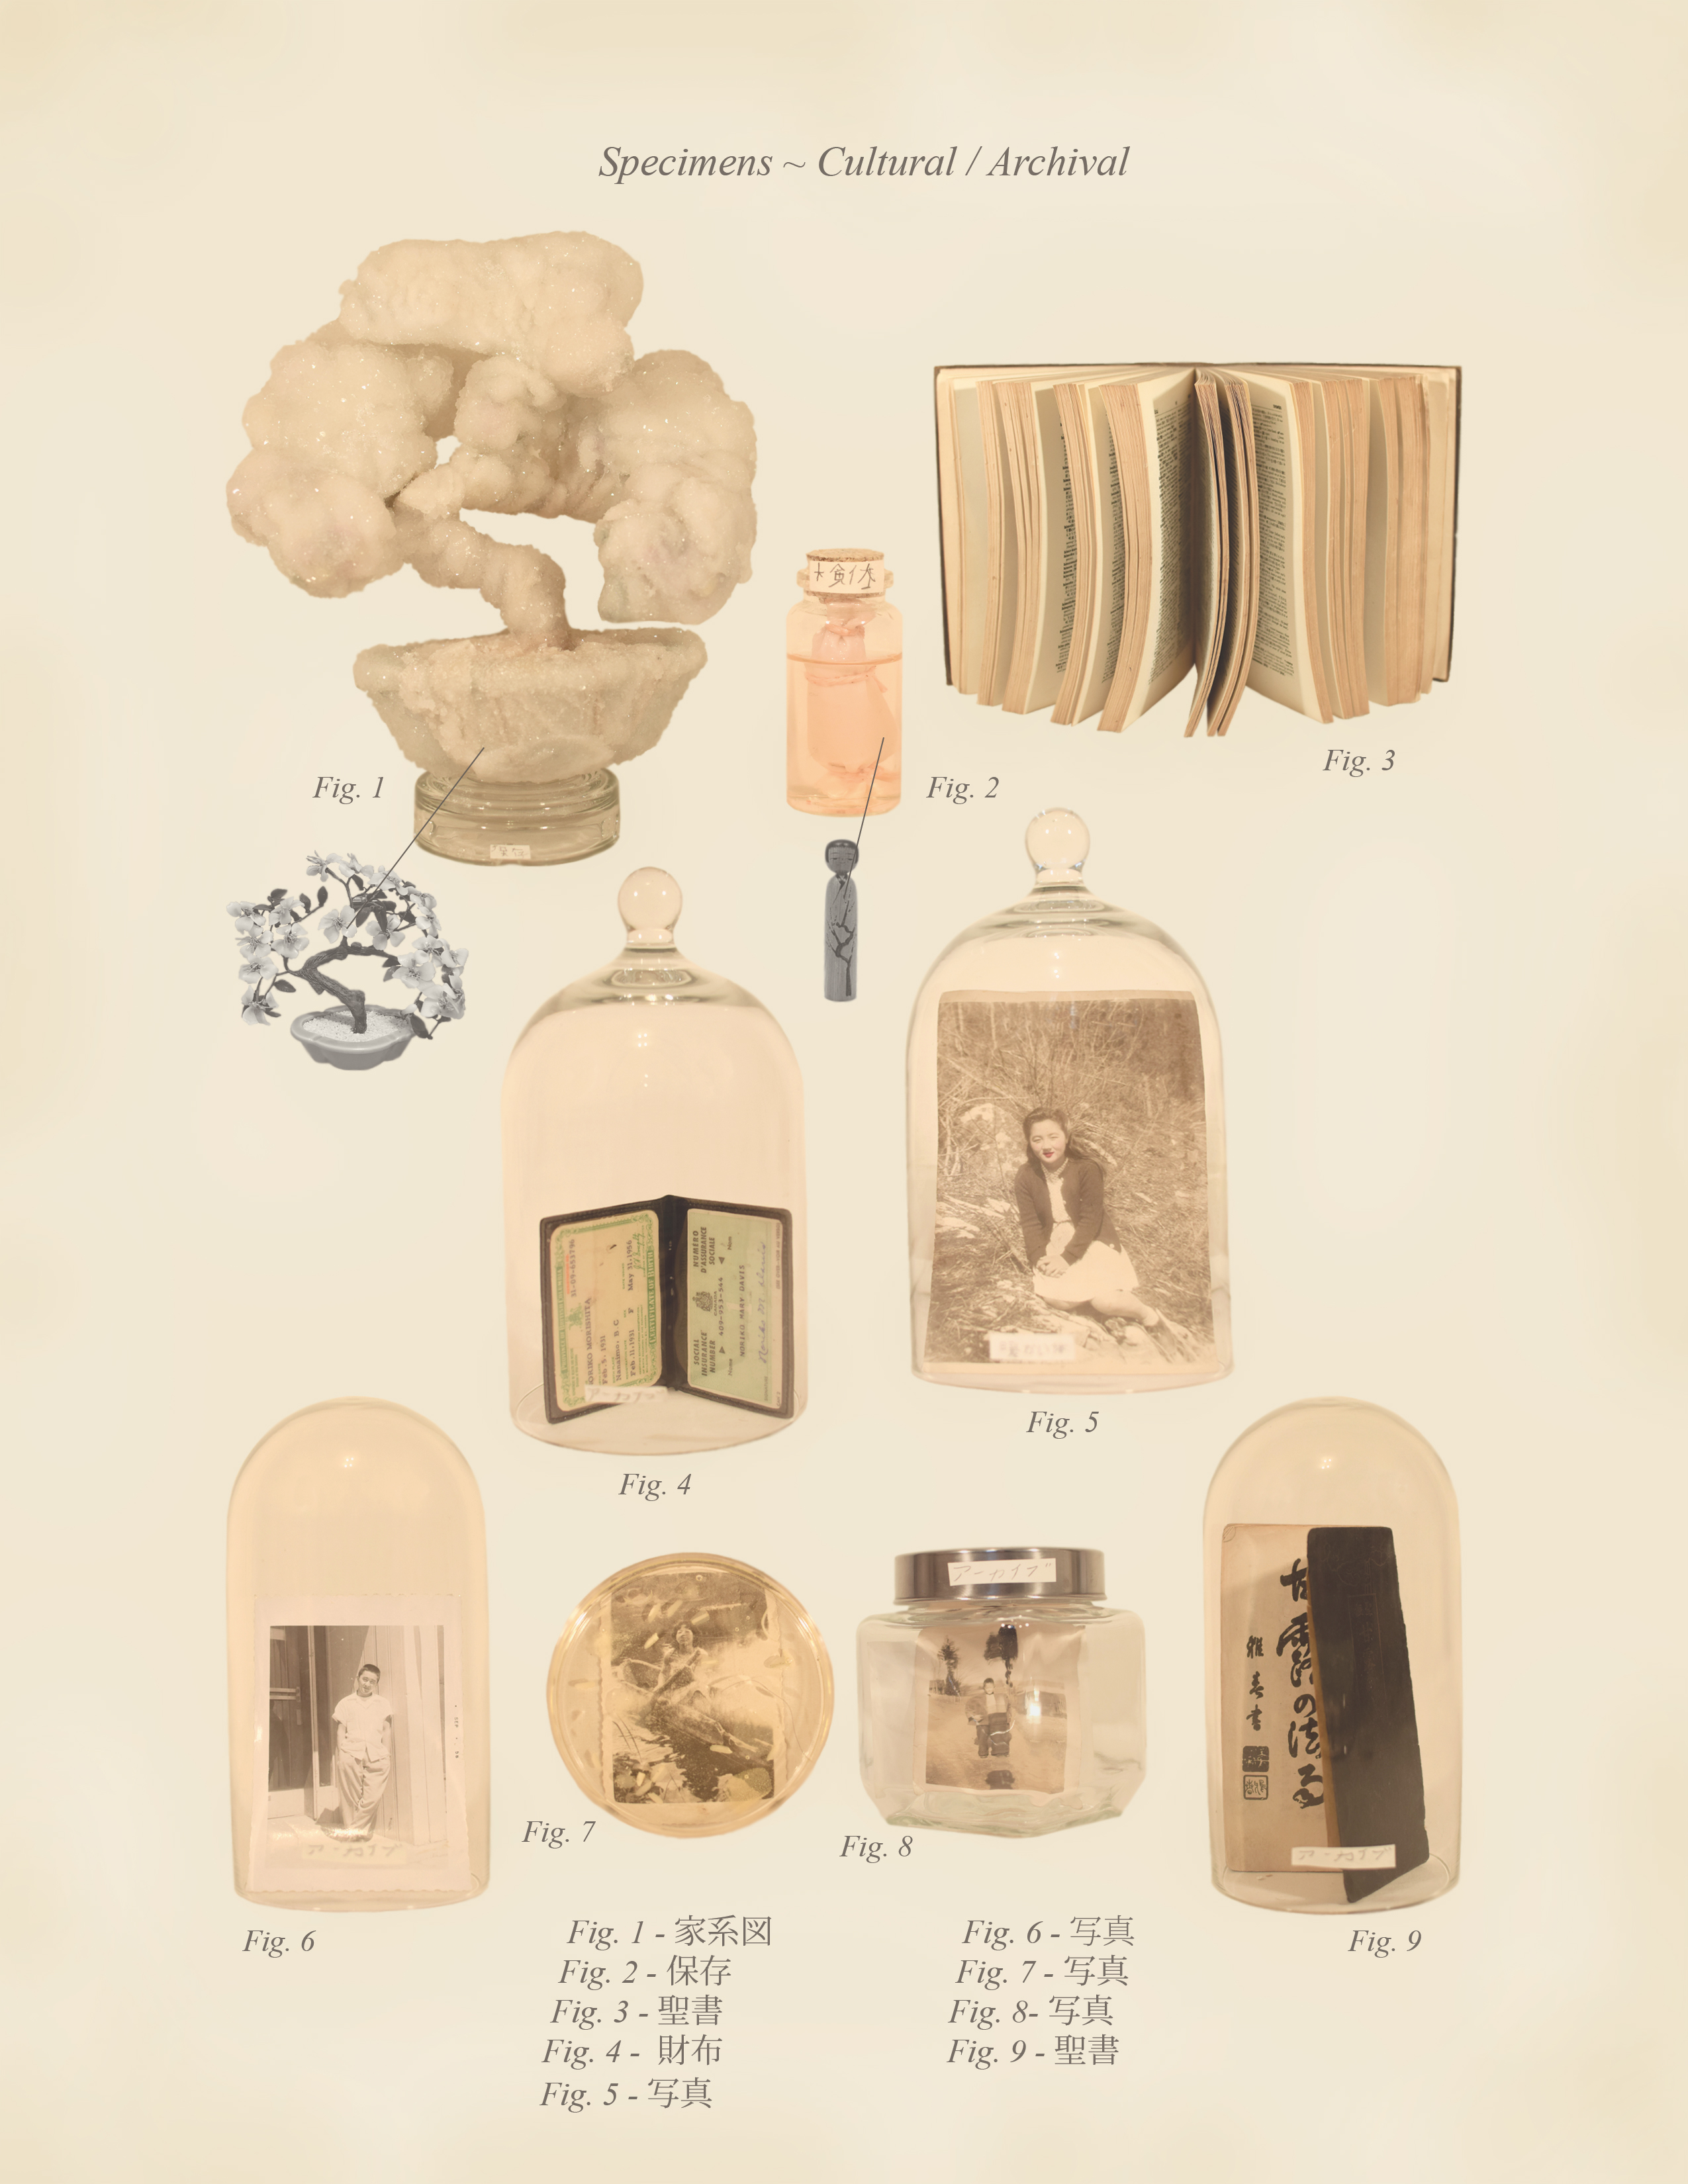 Specimens ~ Cultural / Archival